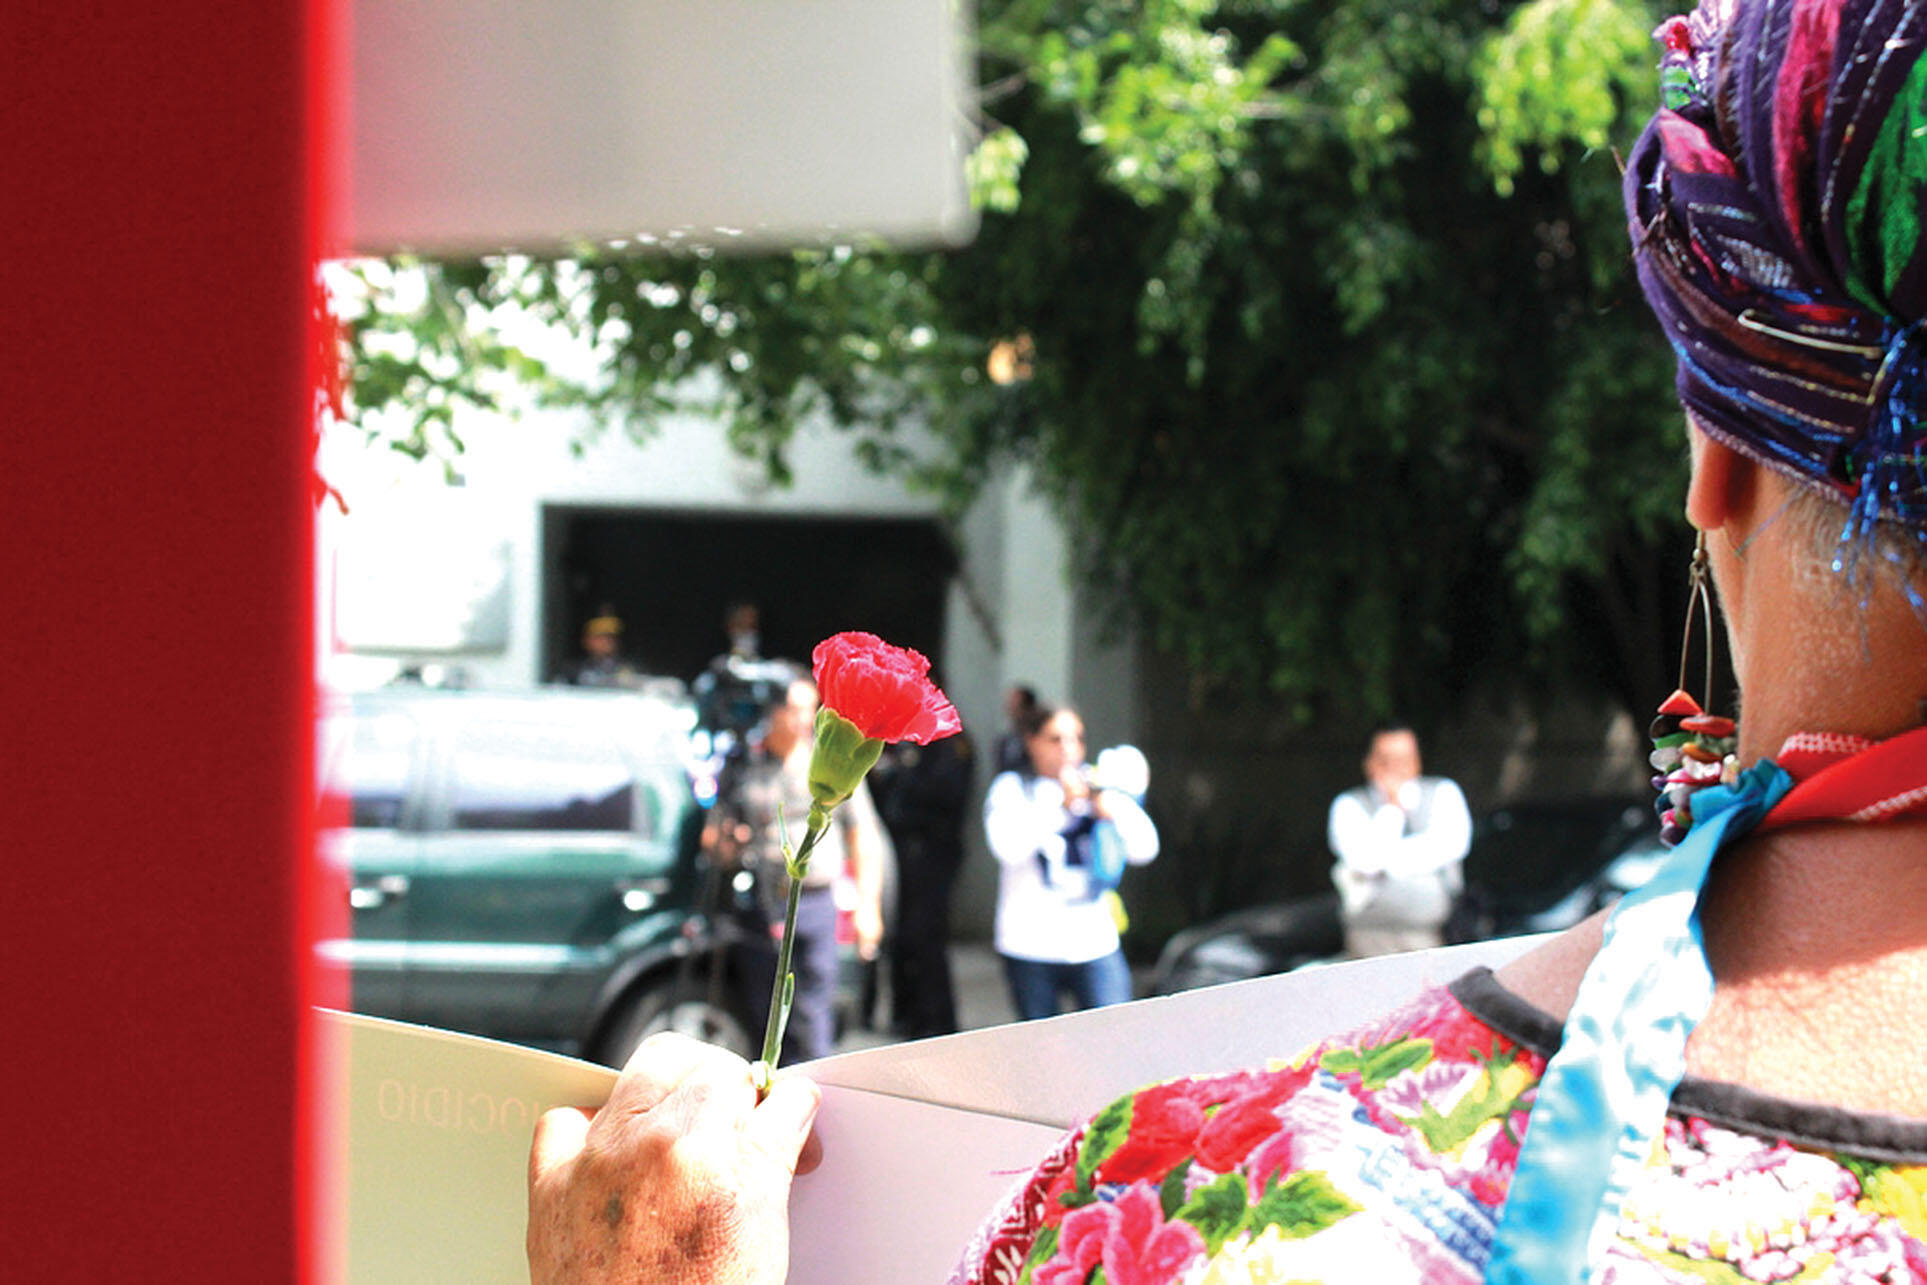 A woman holding a flower protests the annulment of Ríos Montt’s conviction. (Photo courtesy of Amnistía México.)